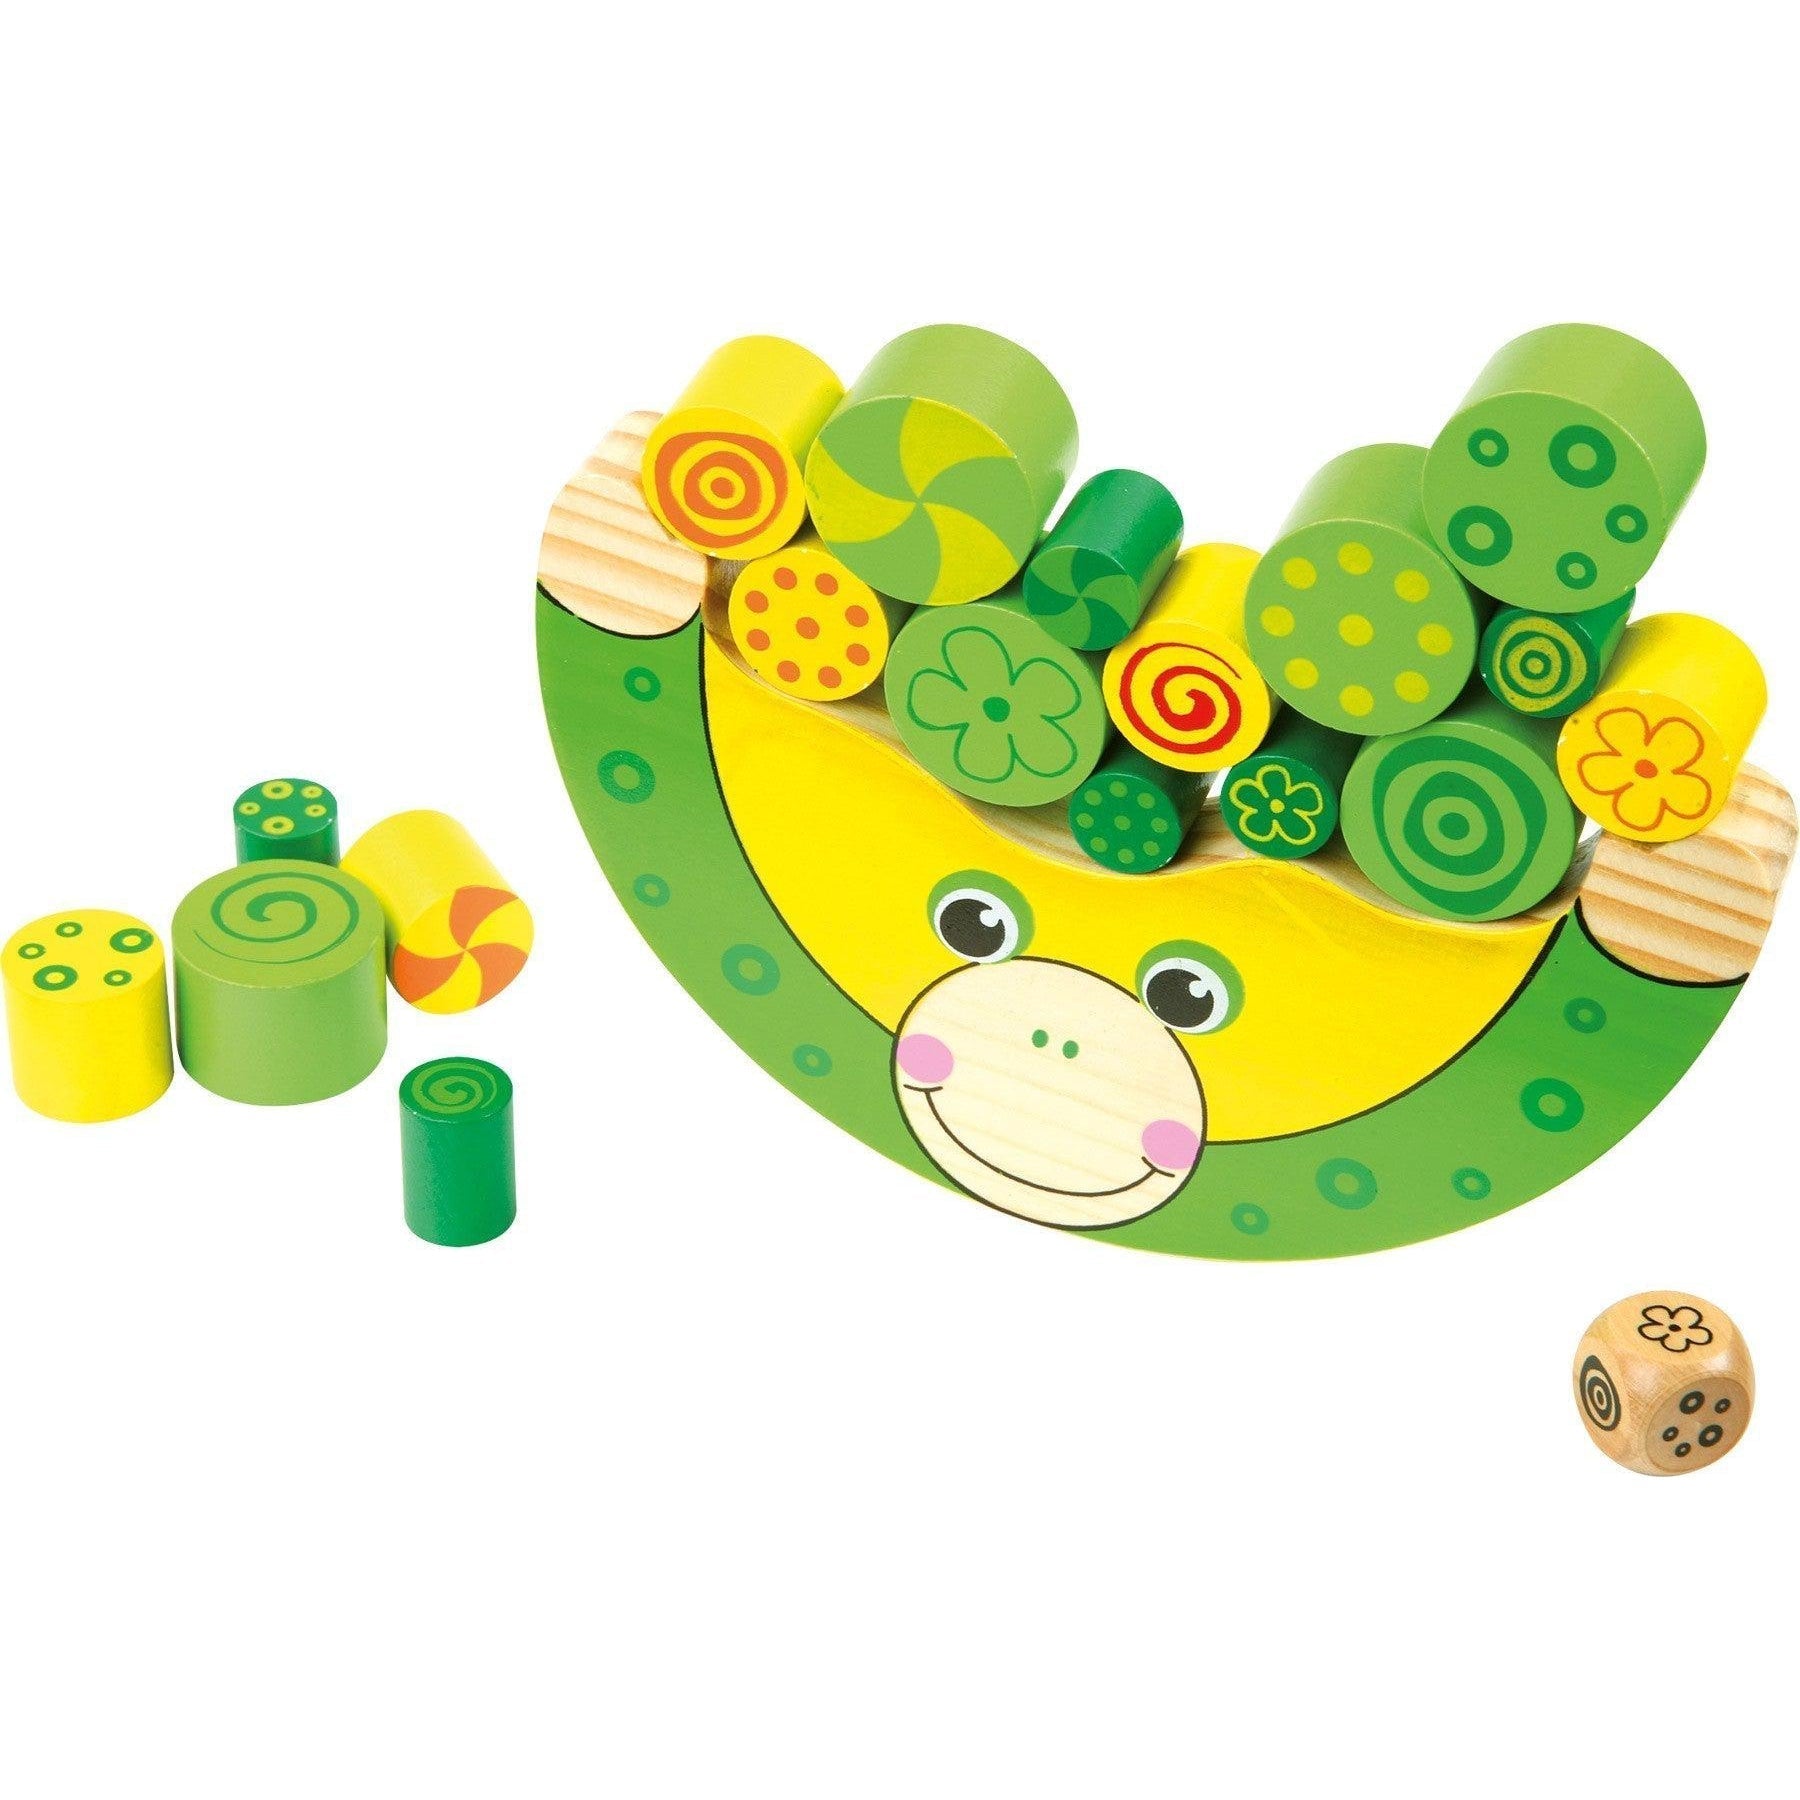 Balancing Frog, Introducing the Balancing Frog, a classic game of skill that will provide endless hours of fun and entertainment for your little ones. This exciting game includes 1 frog base, cylinder shapes in 3 different sizes, and 1 dice.To start the stacking fun, simply roll the dice and match the colors on the dice to the cylinders. Fit the matching cylinder onto the frog base where possible, and carefully balance each piece on top of one another. The challenge lies in keeping the Balancing Frog from l